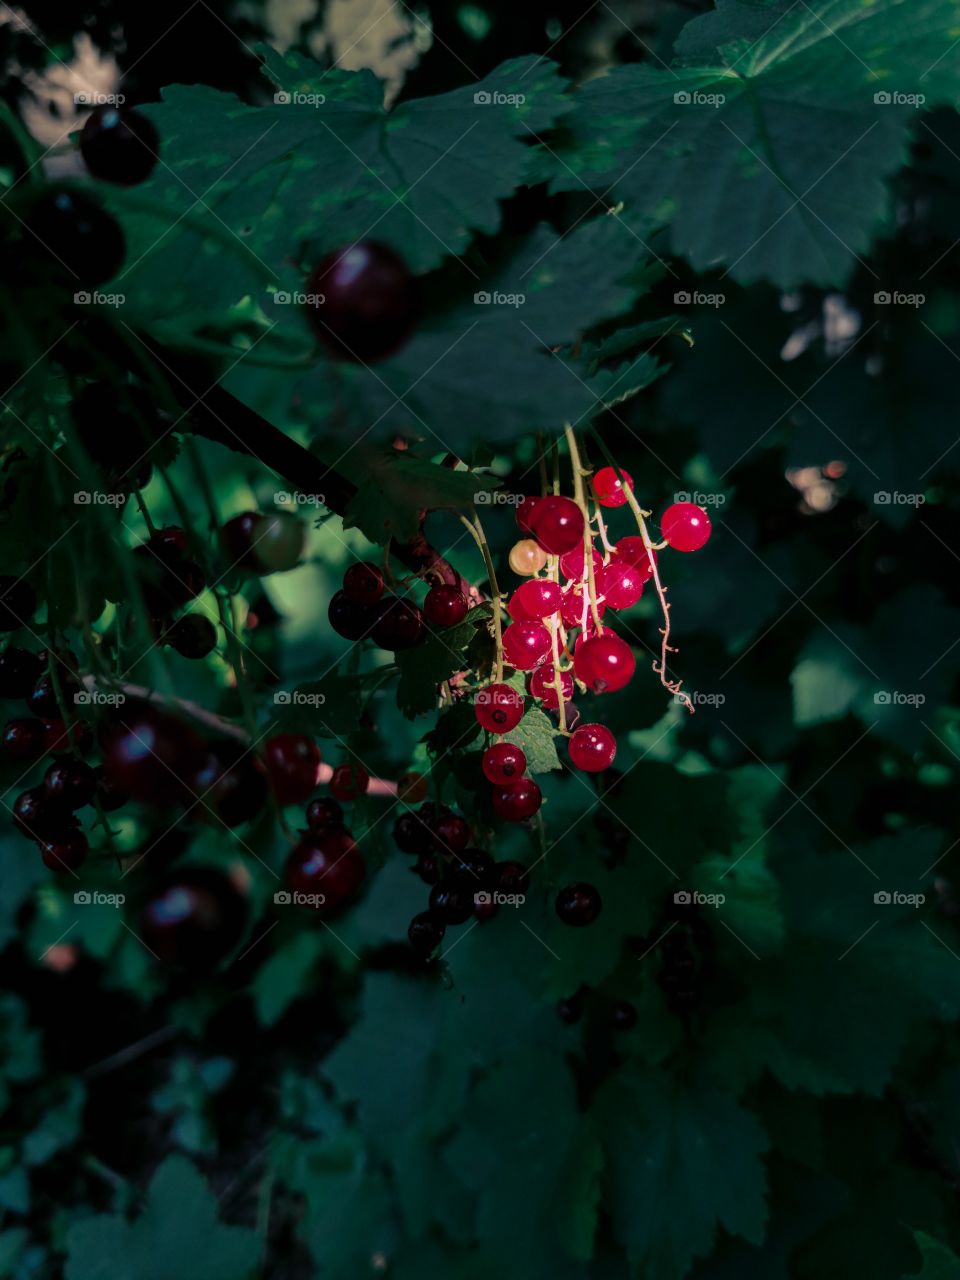 Red currants in sunlight surrounded by shadow and green leaves